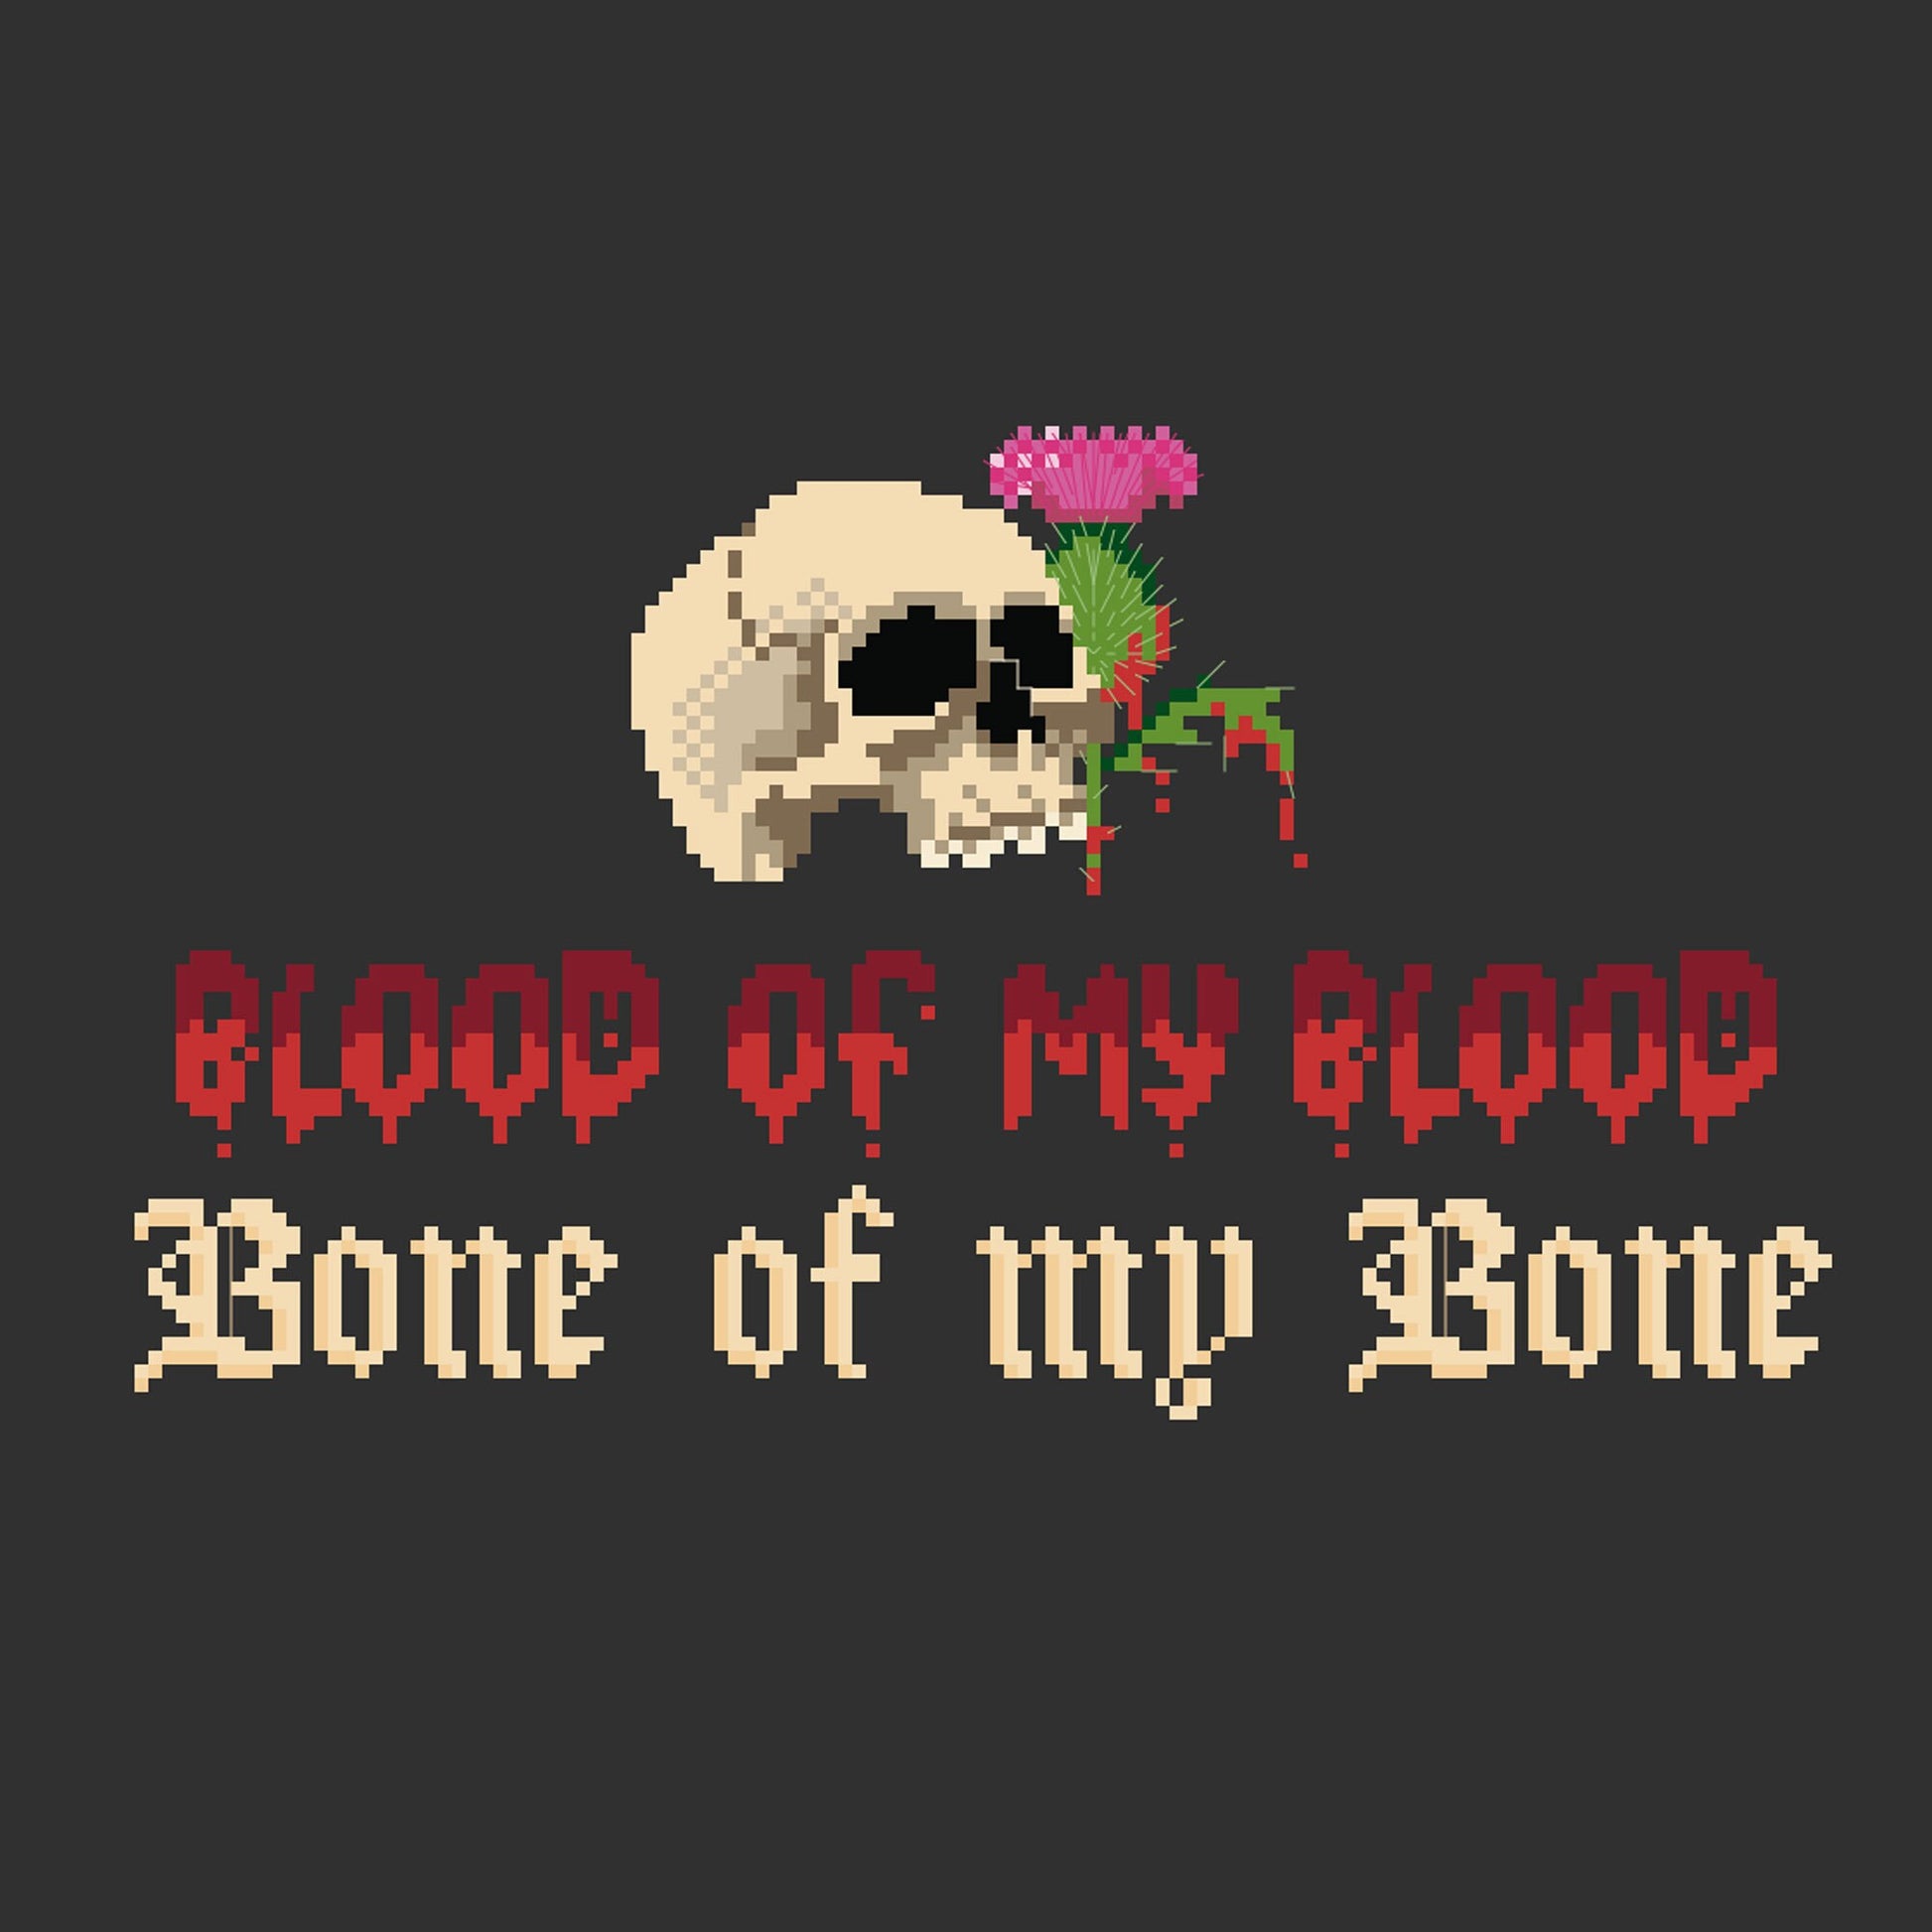 Skull with a bleeding thistle above stylized text of Blood of my Blood, Bone of my Bone.